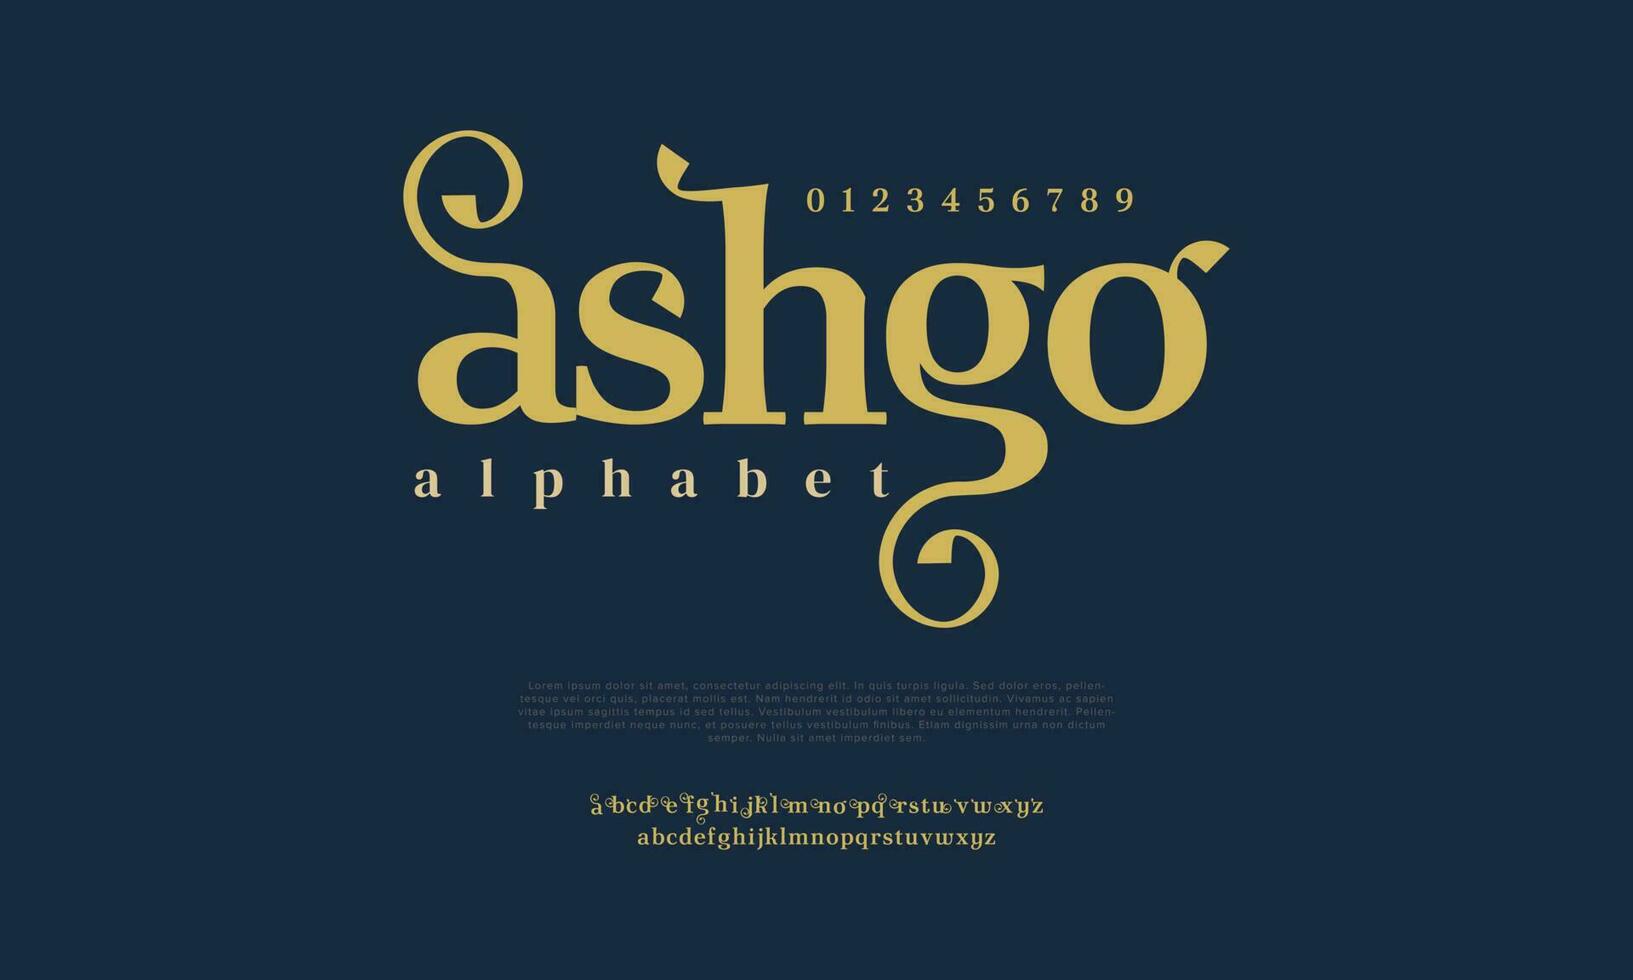 Ashgo abstract fashion wedding l logo font alphabet. Minimal modern urban fonts for logo, brand etc. Typography typeface uppercase lowercase and number. vector illustration